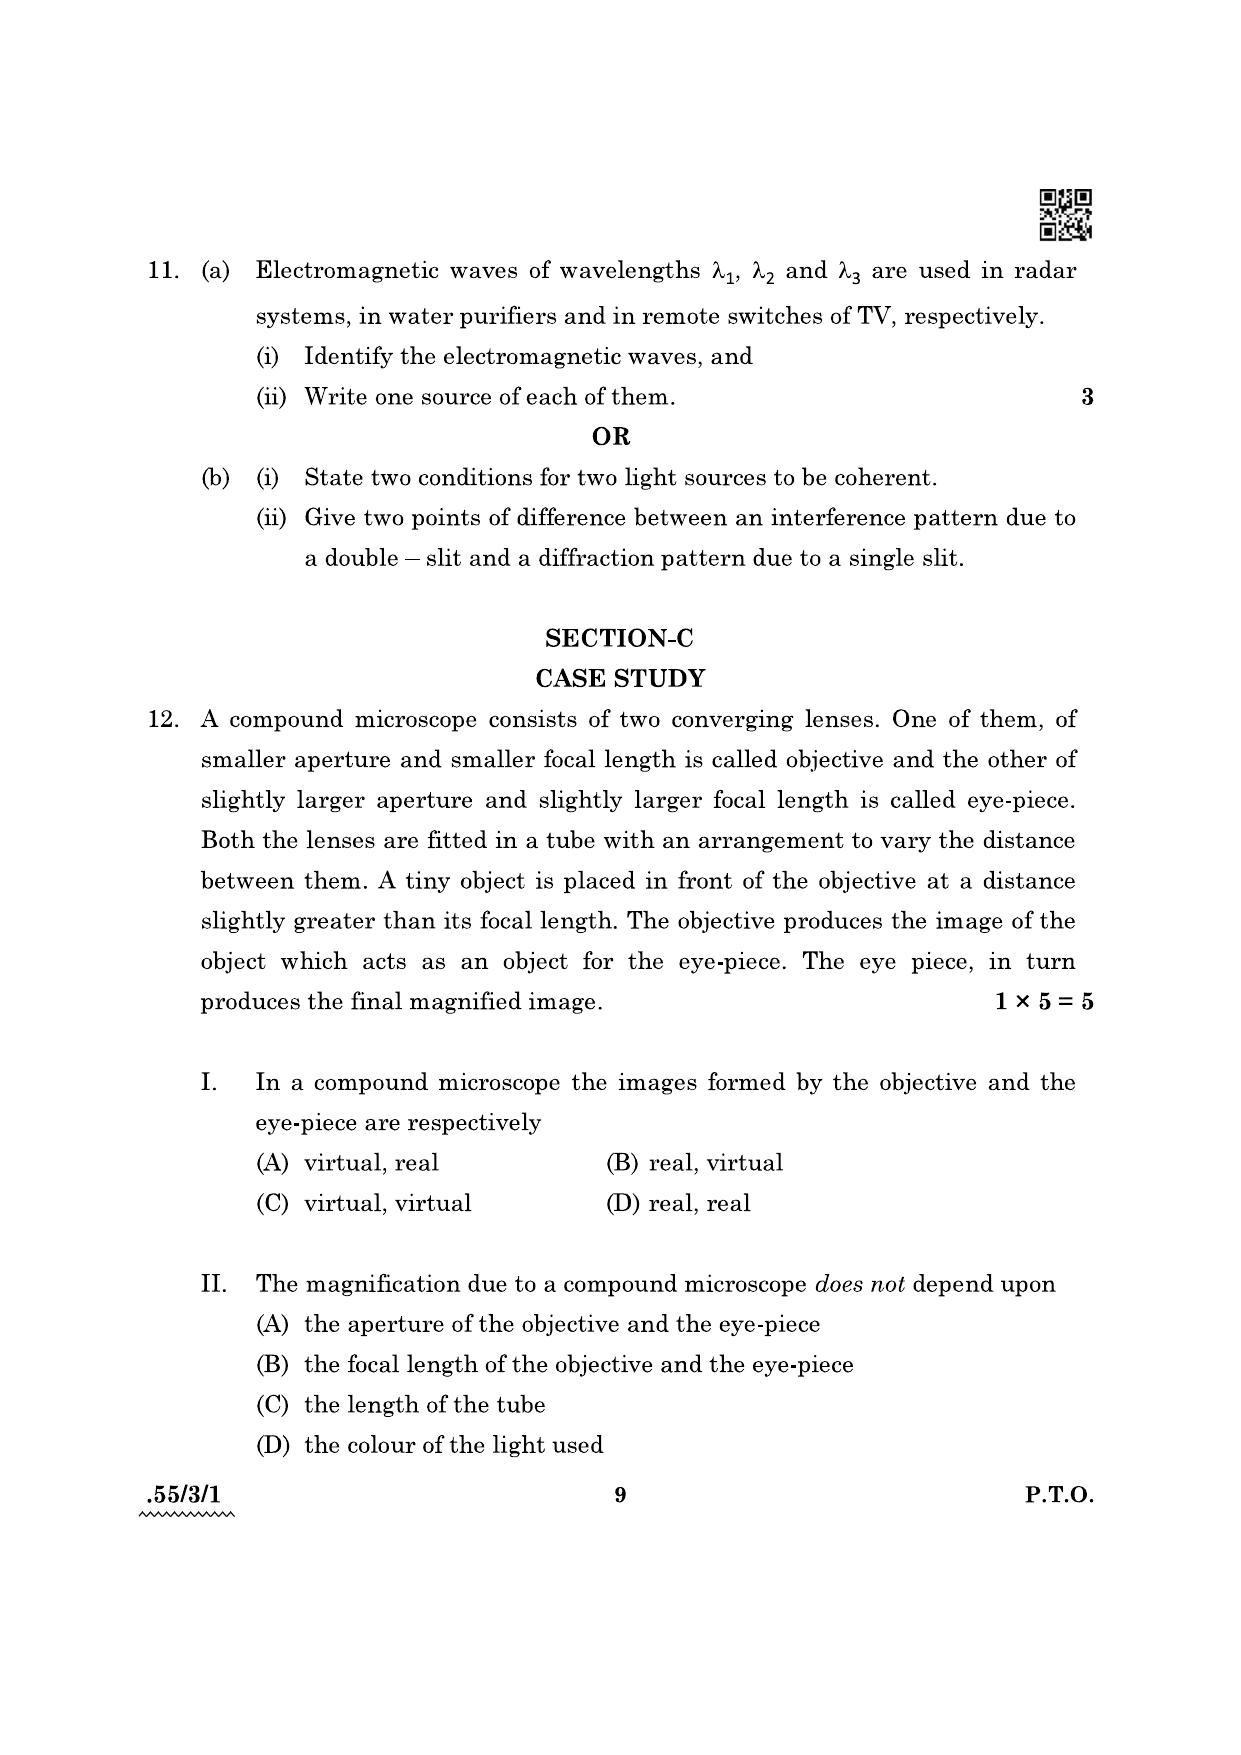 CBSE Class 12 55-3-1 Physics 2022 Question Paper - Page 9